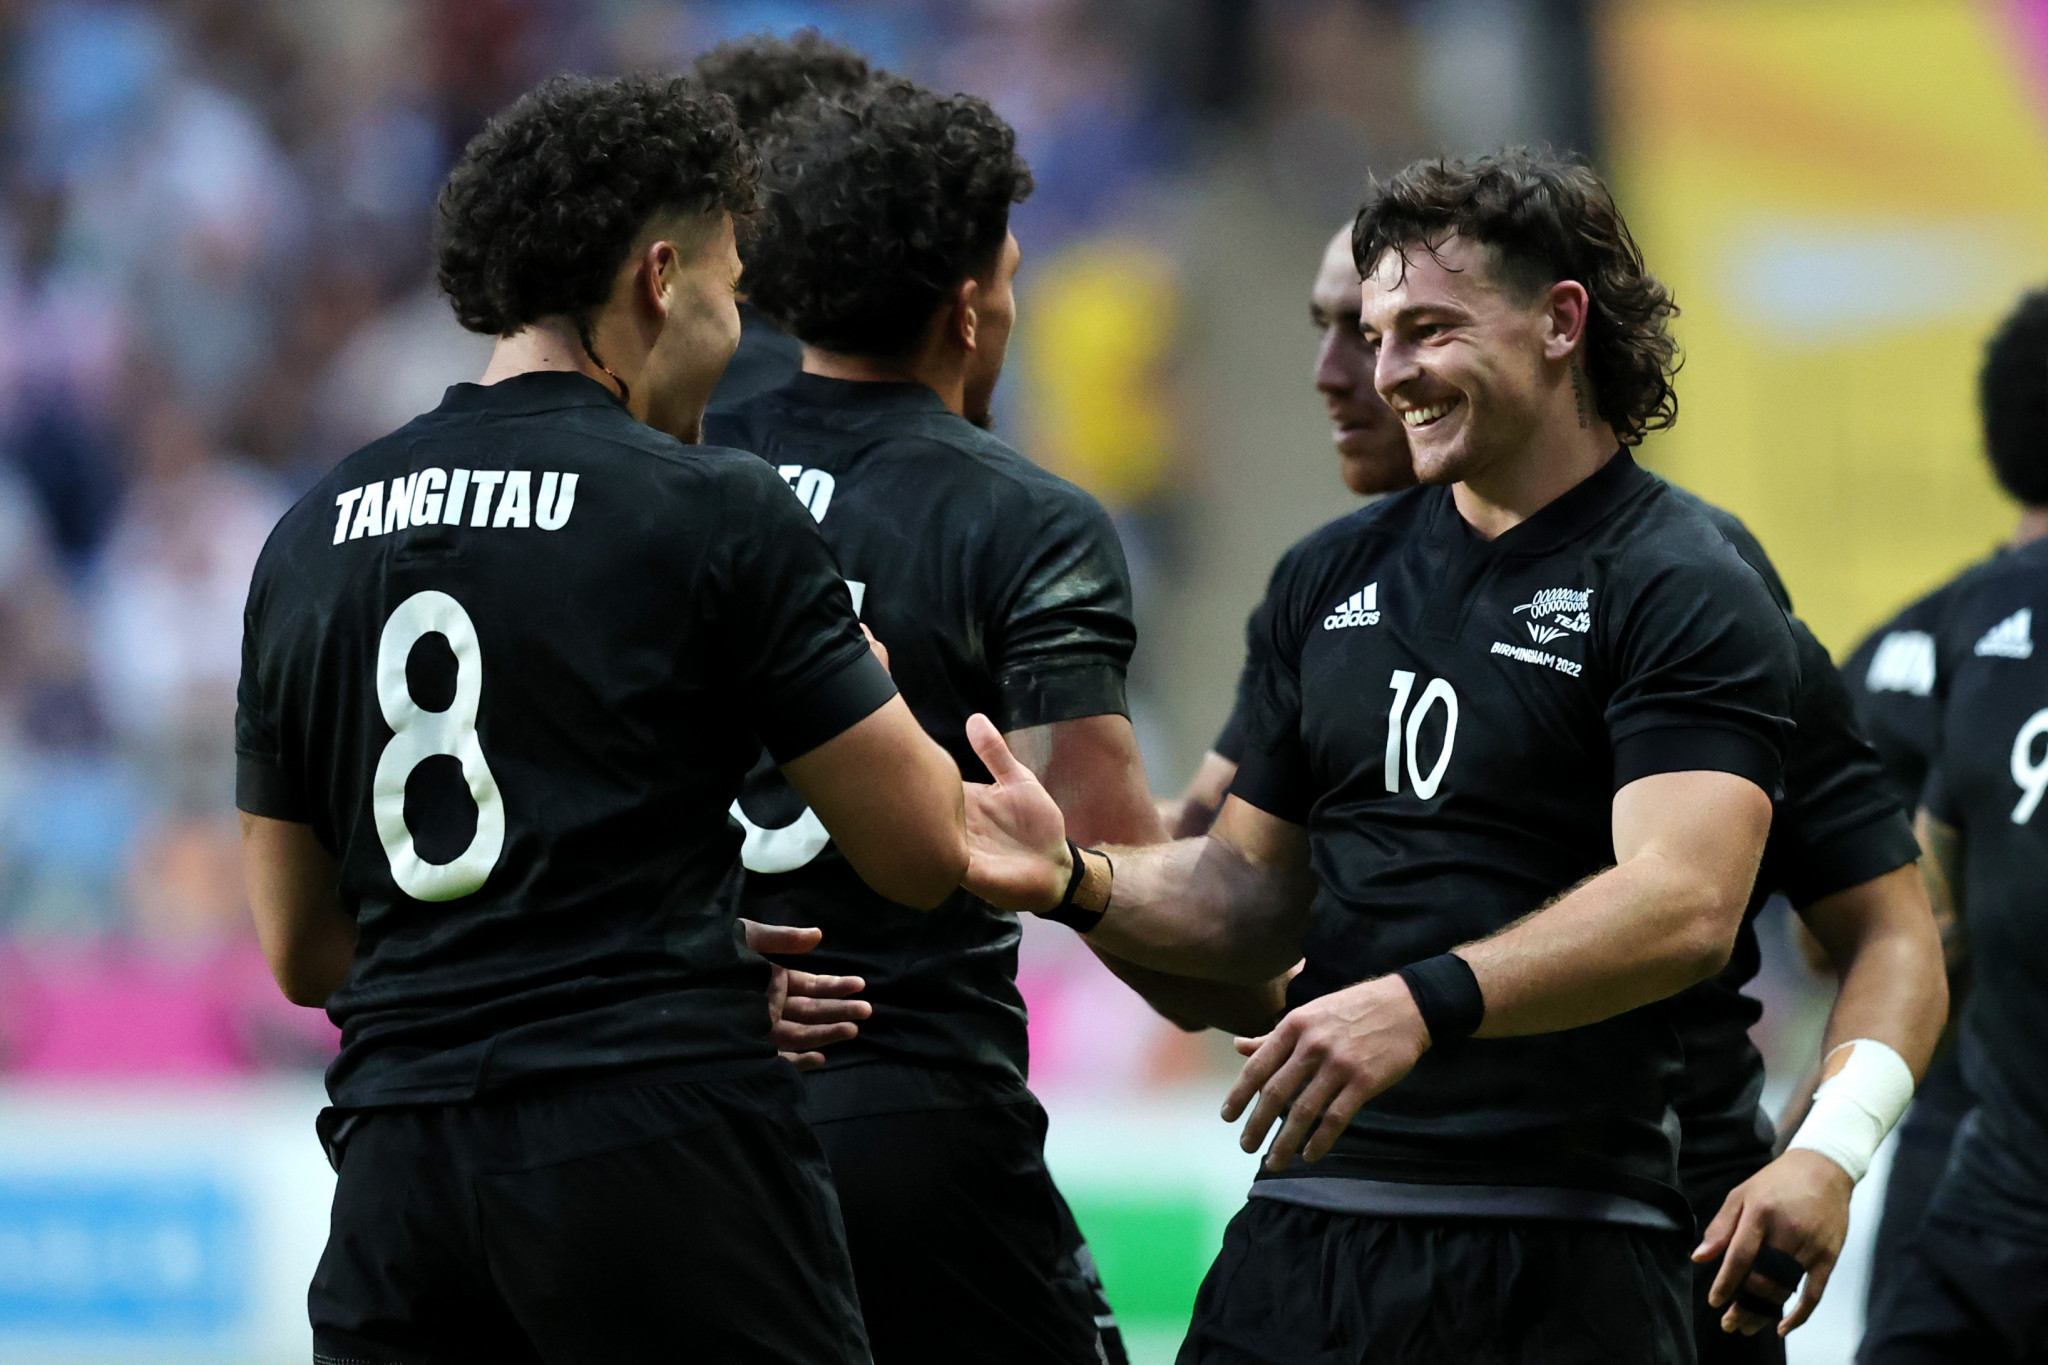 New Zealand to defend both titles at Rugby World Cup Sevens in South Africa